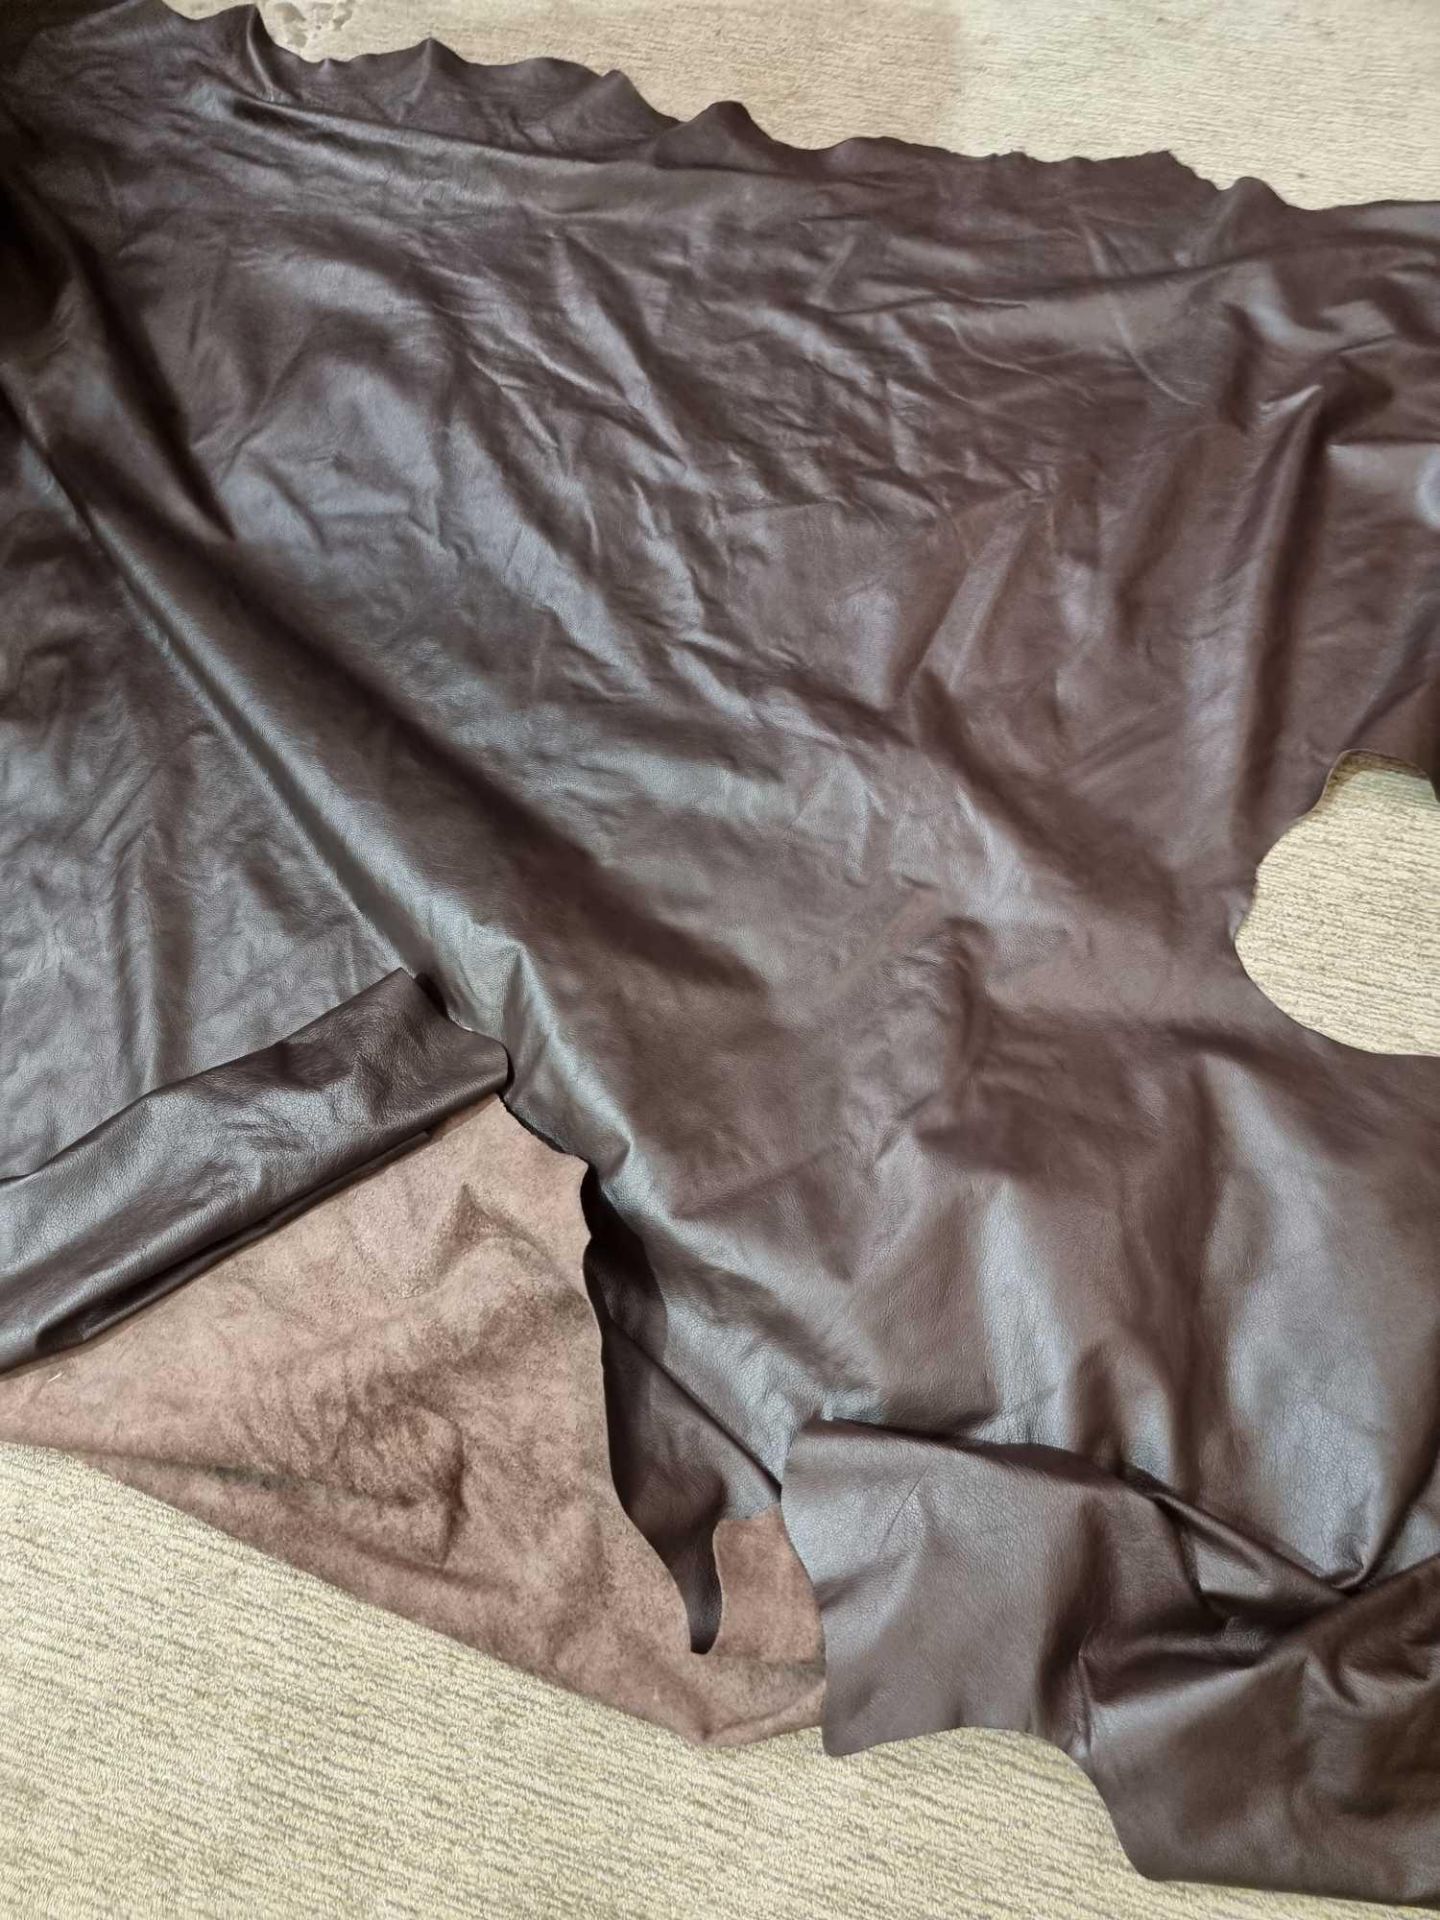 Mastrotto Hudson Chocolate Leather Hide approximately 4.56mÂ² 2.4 x 1.9cm - Image 2 of 2